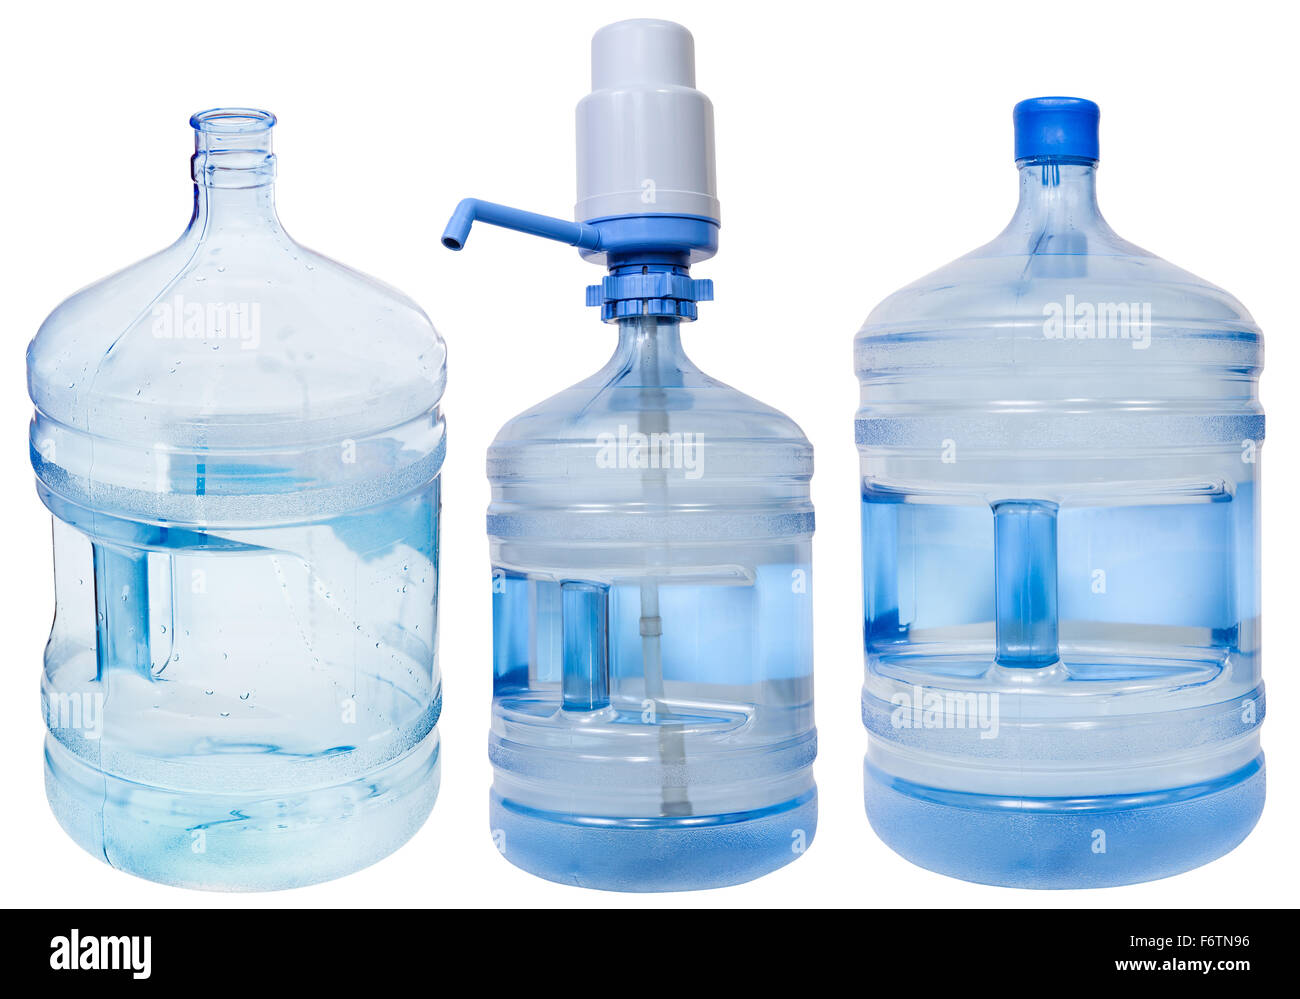 full, empty and closed by manual pump dispenser 5 gallon Drinking Water  bottles isolated on white background Stock Photo - Alamy